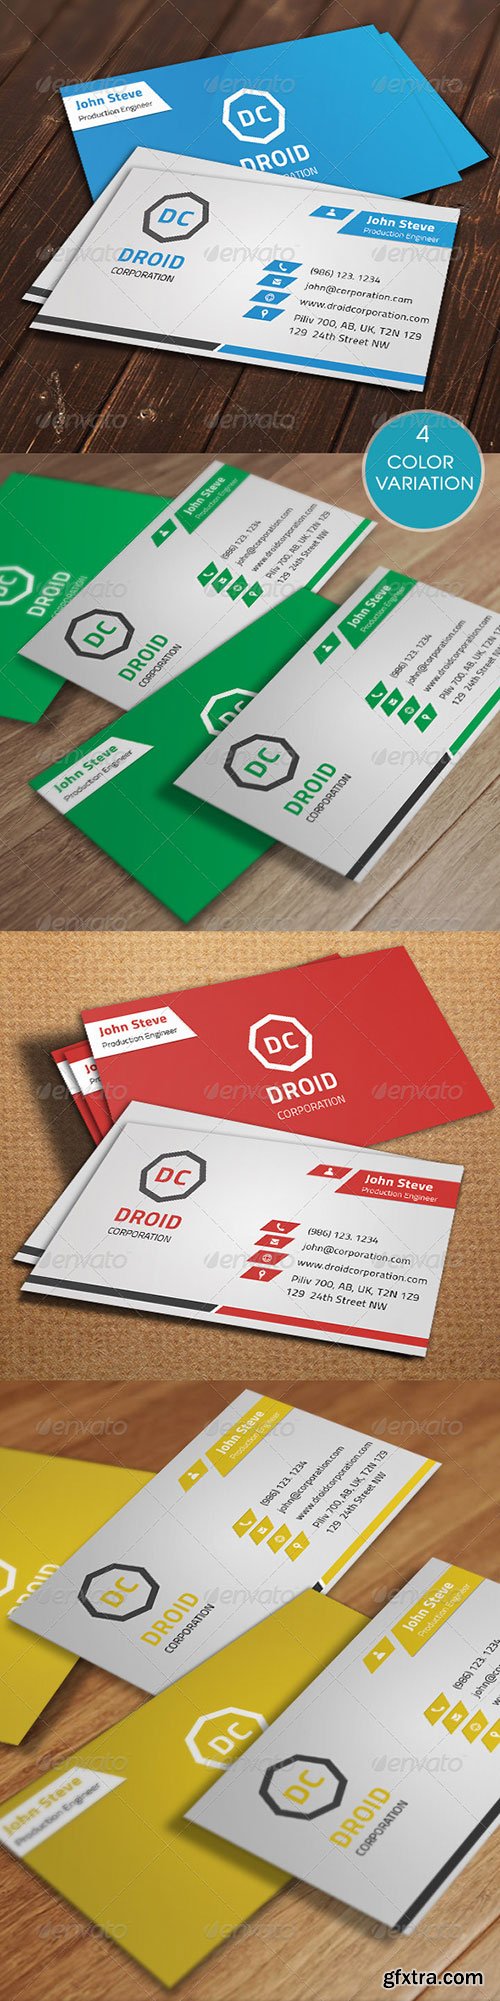 GraphicRiver - Modern Corporate Business Card v7